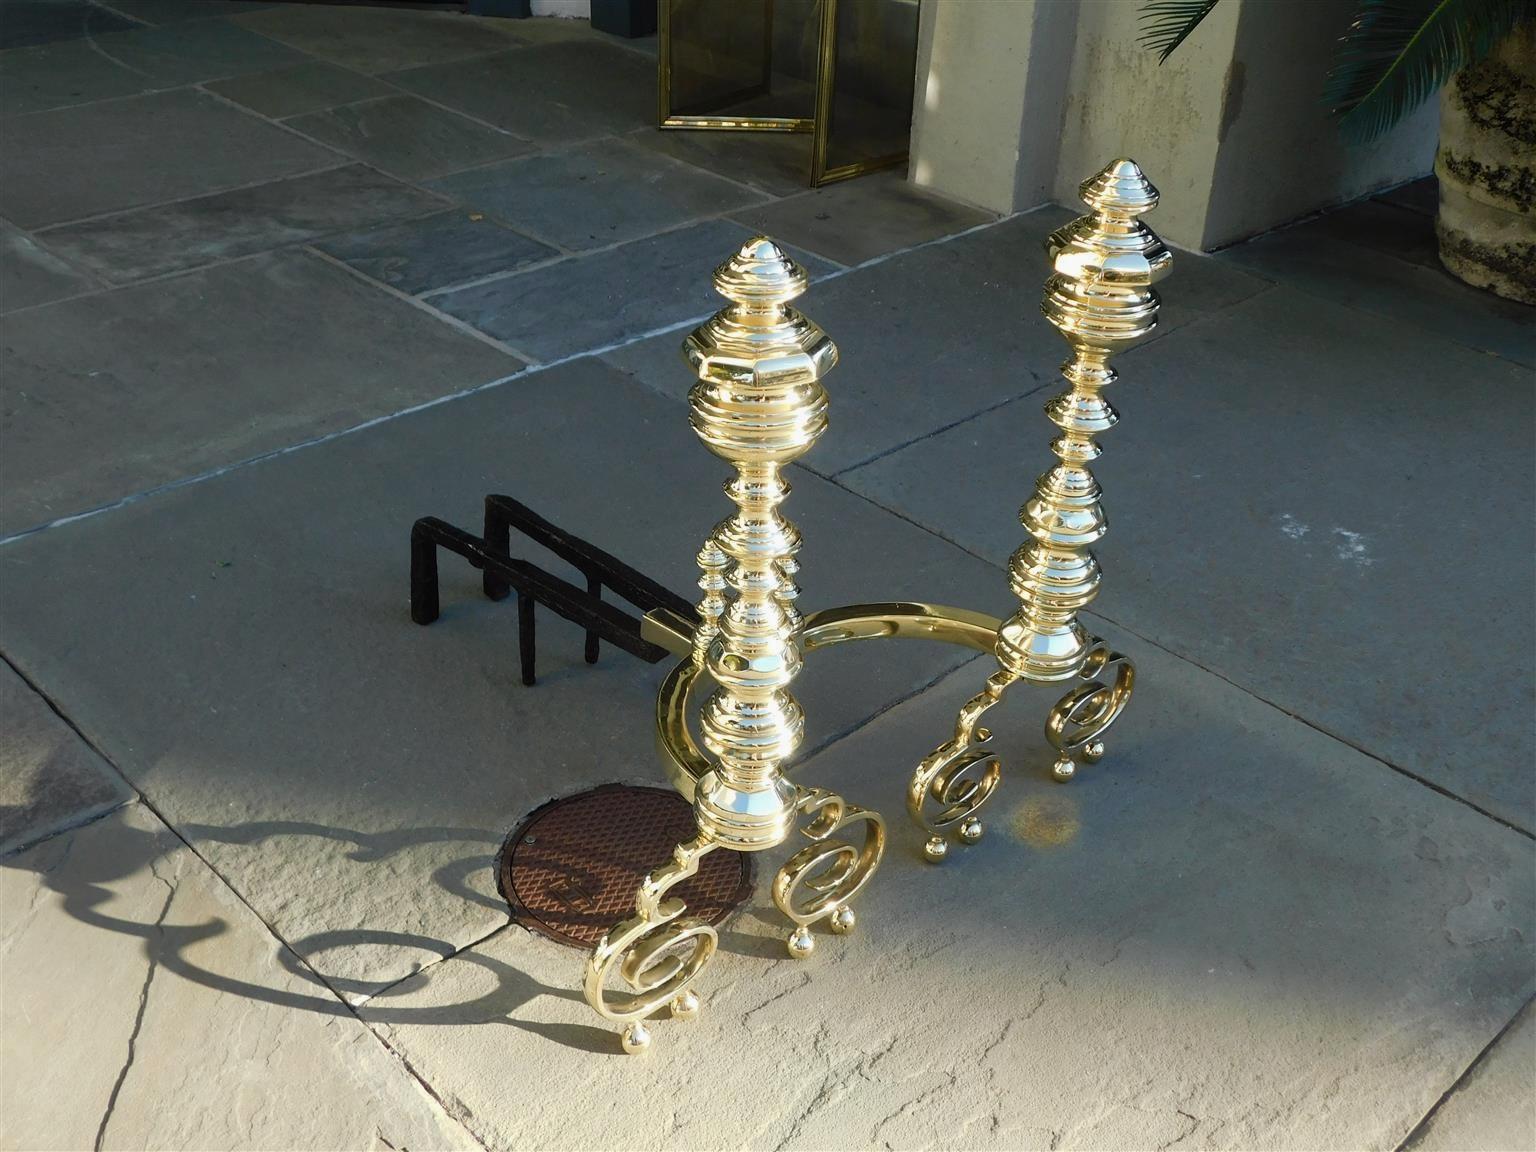 Pair of American brass flanking faceted finial andirons with centered turned faceted columns, meticulously turned matching log stops, original wrought iron rear dog legs, and resting on scrolled legs with double ball feet. Philadelphia, Early 19th